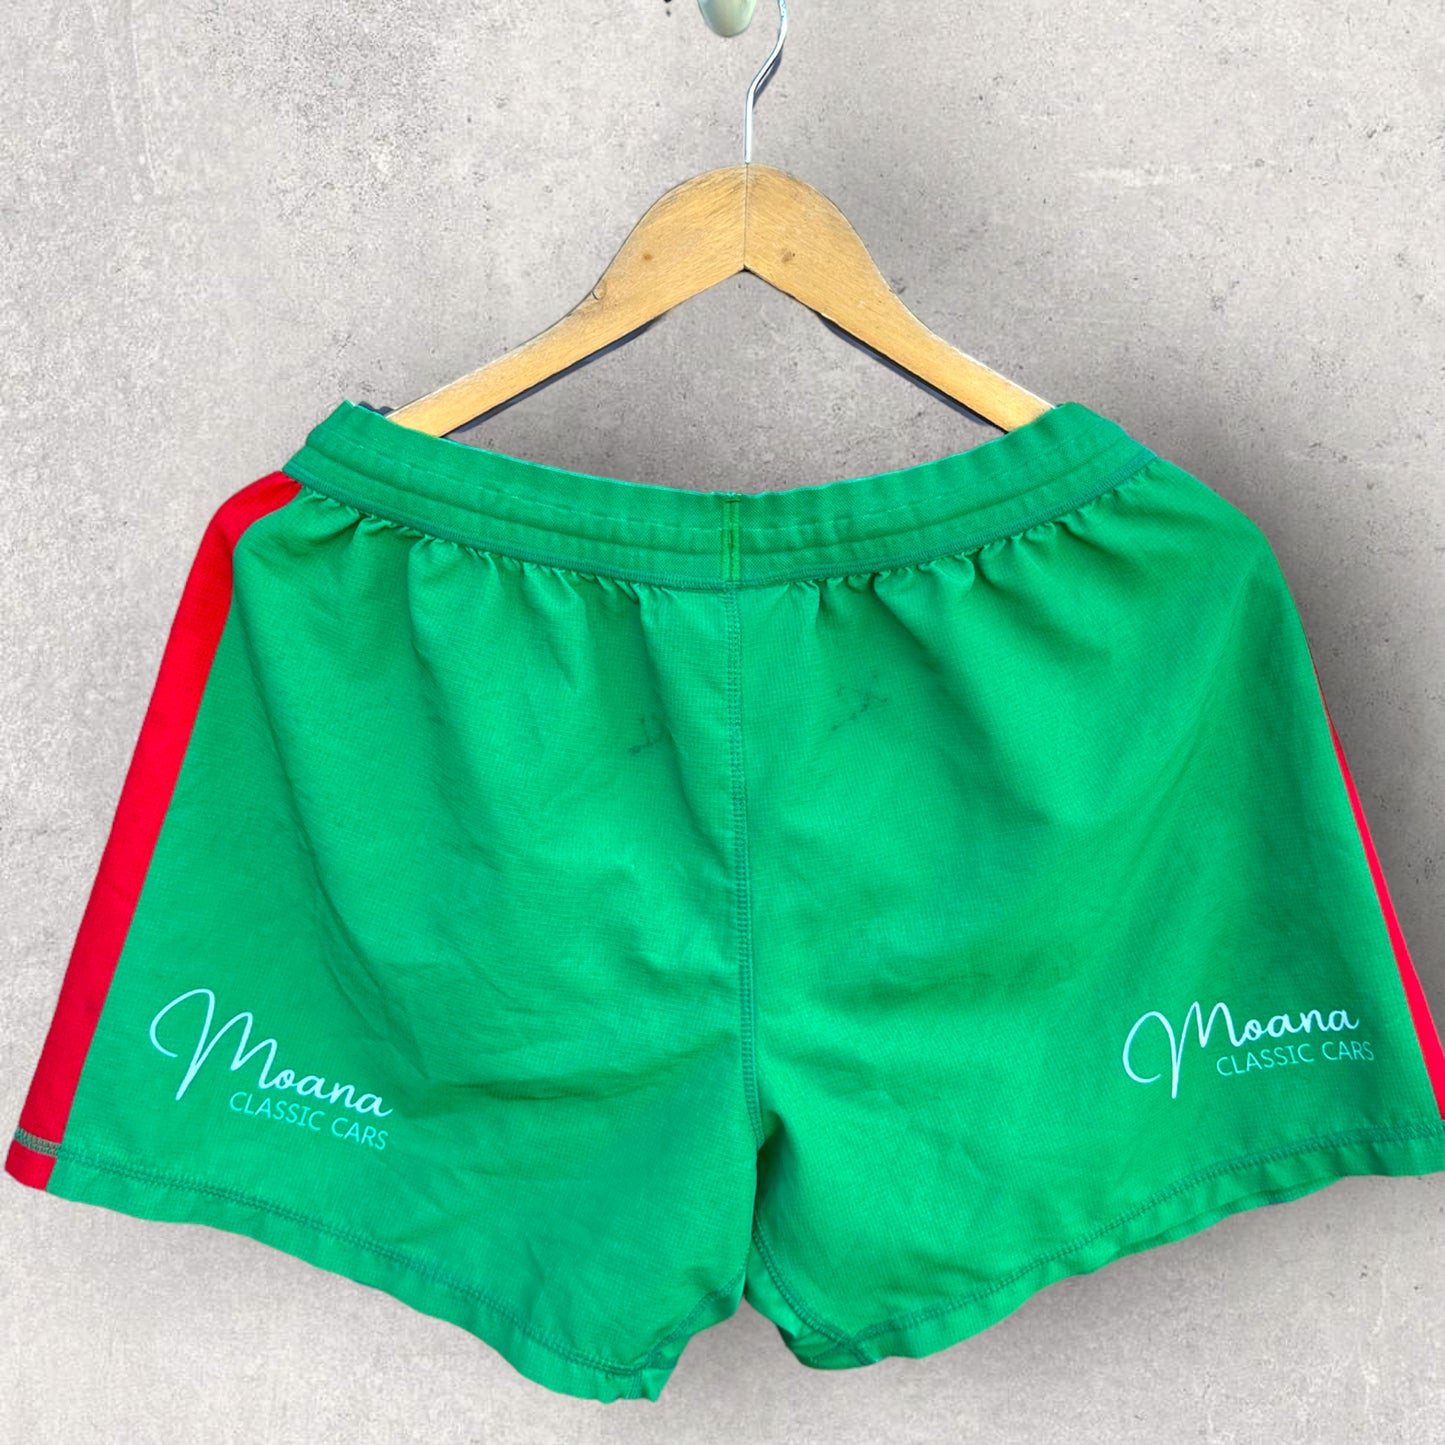 SOUTH SYDNEY RABBITOHS NSW CUP/KNOCK ON EFFECT MATCH SHORTS